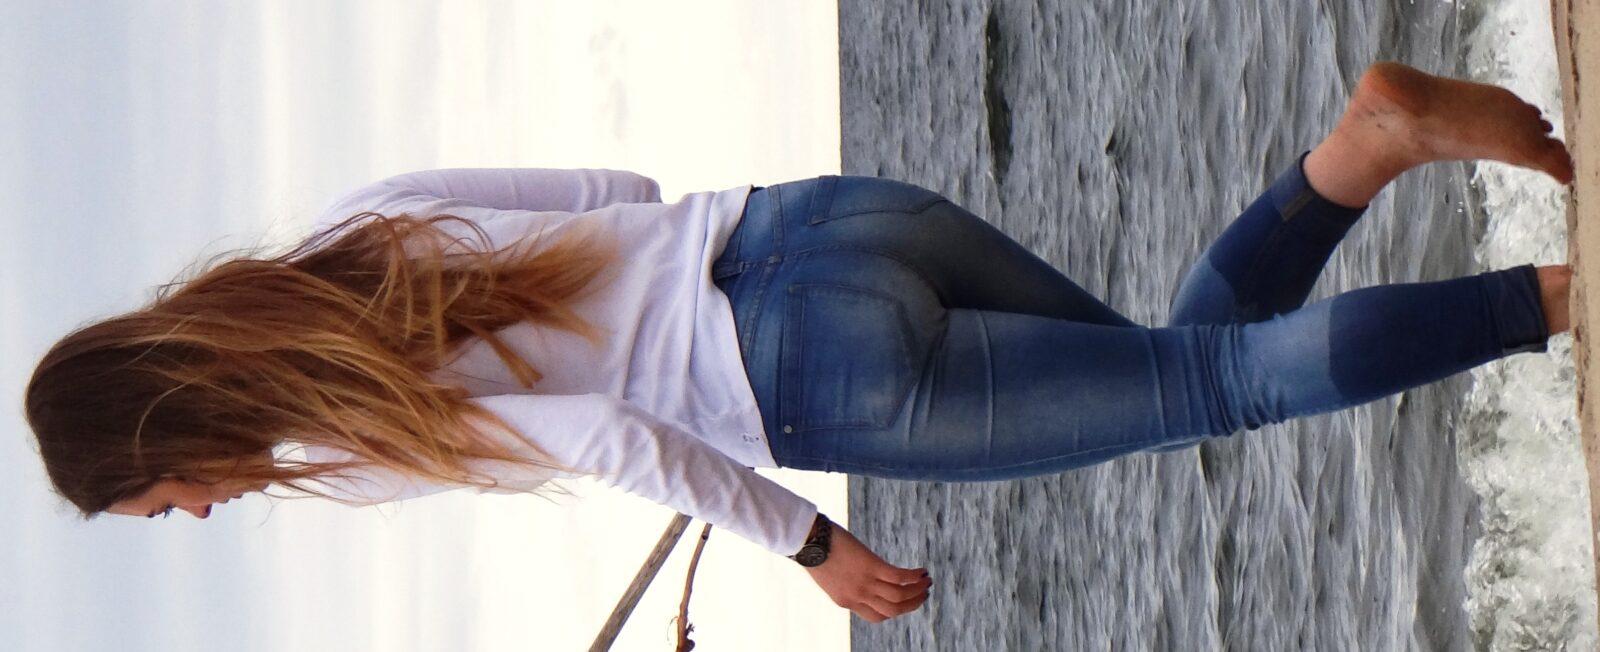 Sexy Jeans image pic